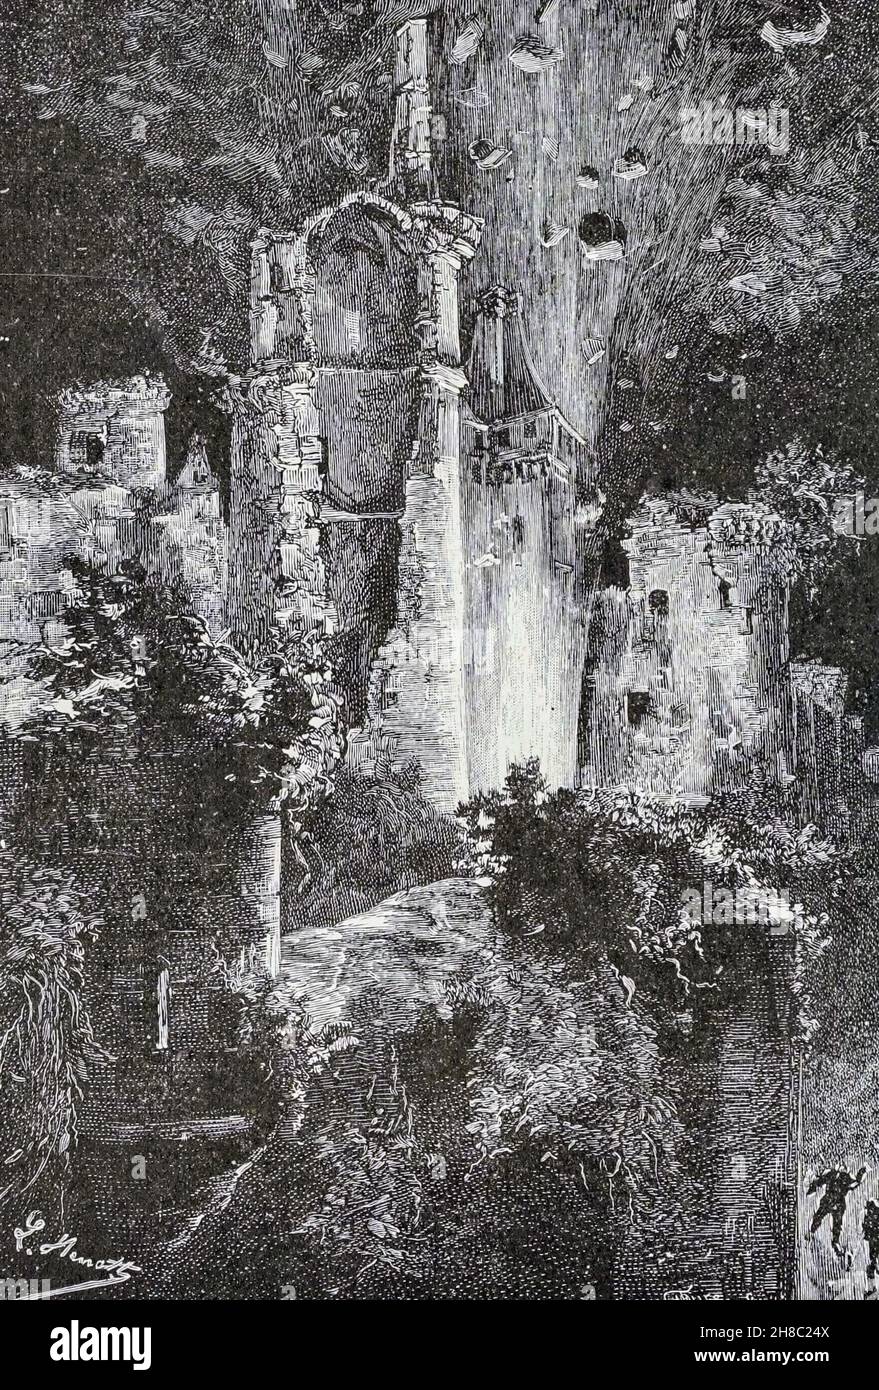 Sheaves of flame sprang to the clouds from ' The Carpathian Castle ' (or The castle of the Carpathians) by Jules, Verne, 1828-1905. May have been the inspiration for Dracula, Published in New York, by Merriam in 1894 In the village of Werst in the Carpathian mountains of Transylvania, some mysterious things are occurring and the villagers believe that Chort (the devil) occupies the castle. A visitor to the region, Count Franz de Telek, is intrigued by the stories and decides to go to the castle and investigate. He finds that the owner of the castle is Baron Rodolphe de Gortz, with whom he is a Stock Photo